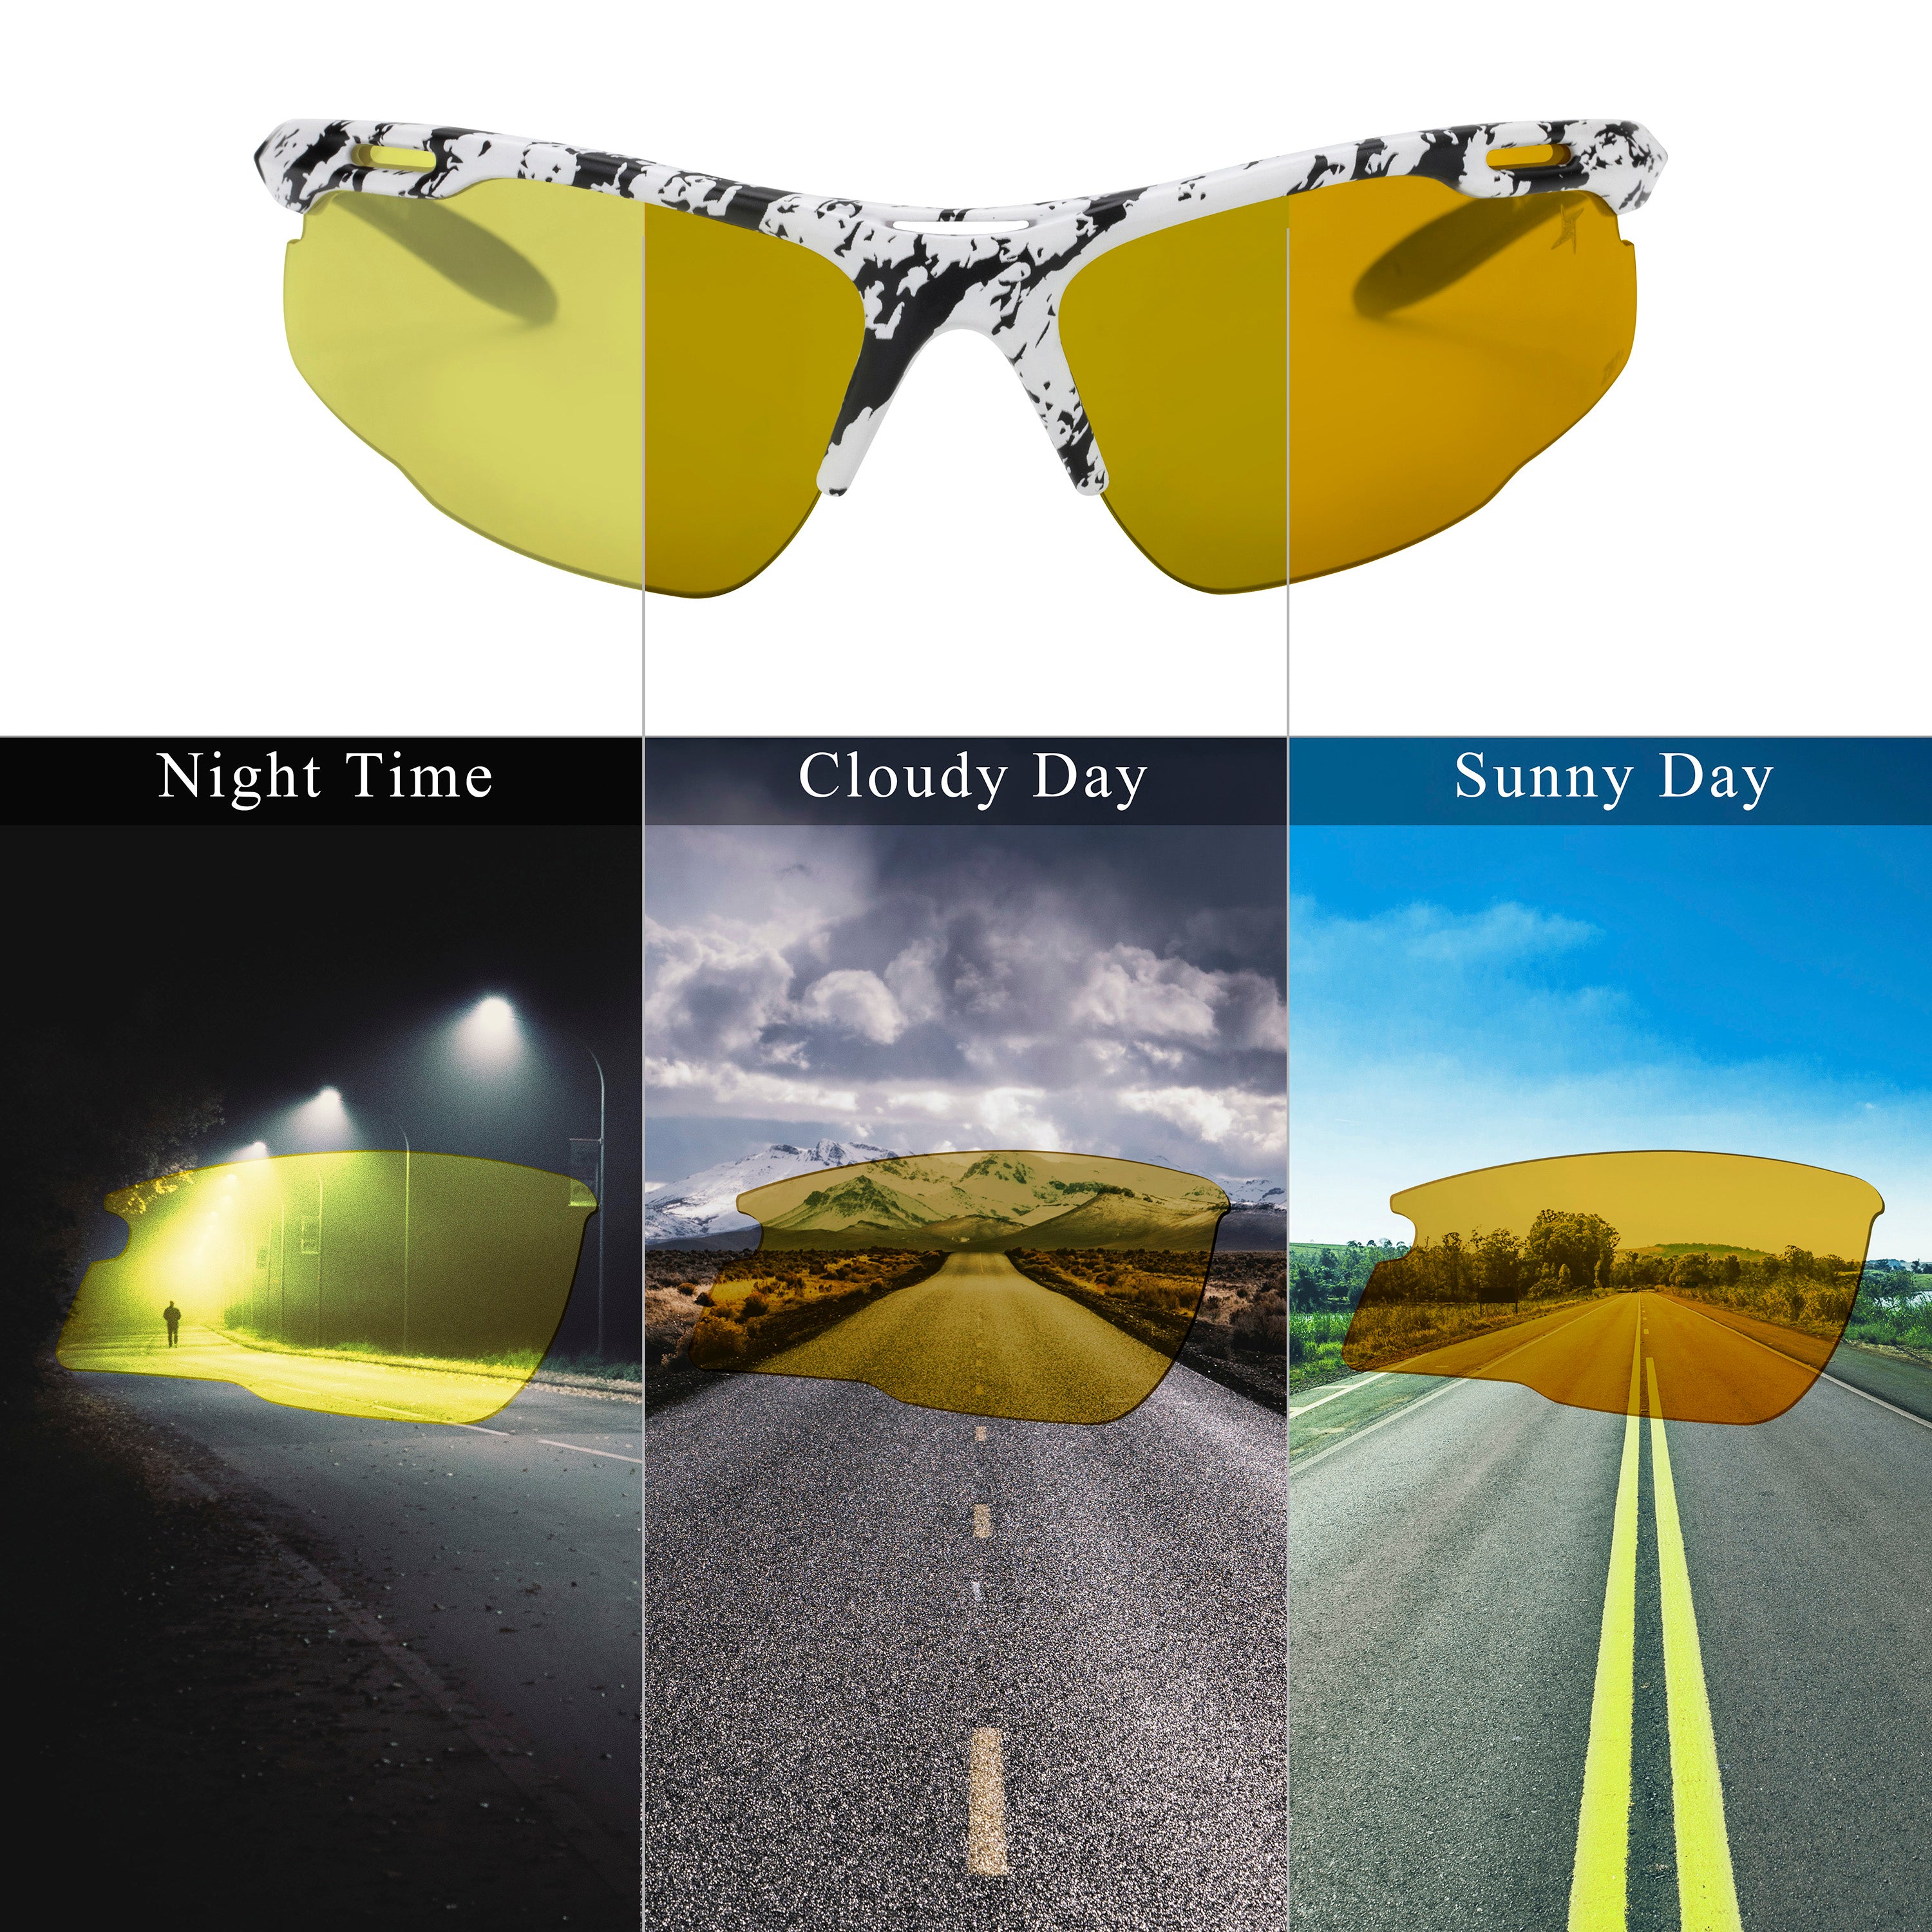 Why You Should Be Wearing Sunglasses on Cloudy Days – Good Day Sunglasses